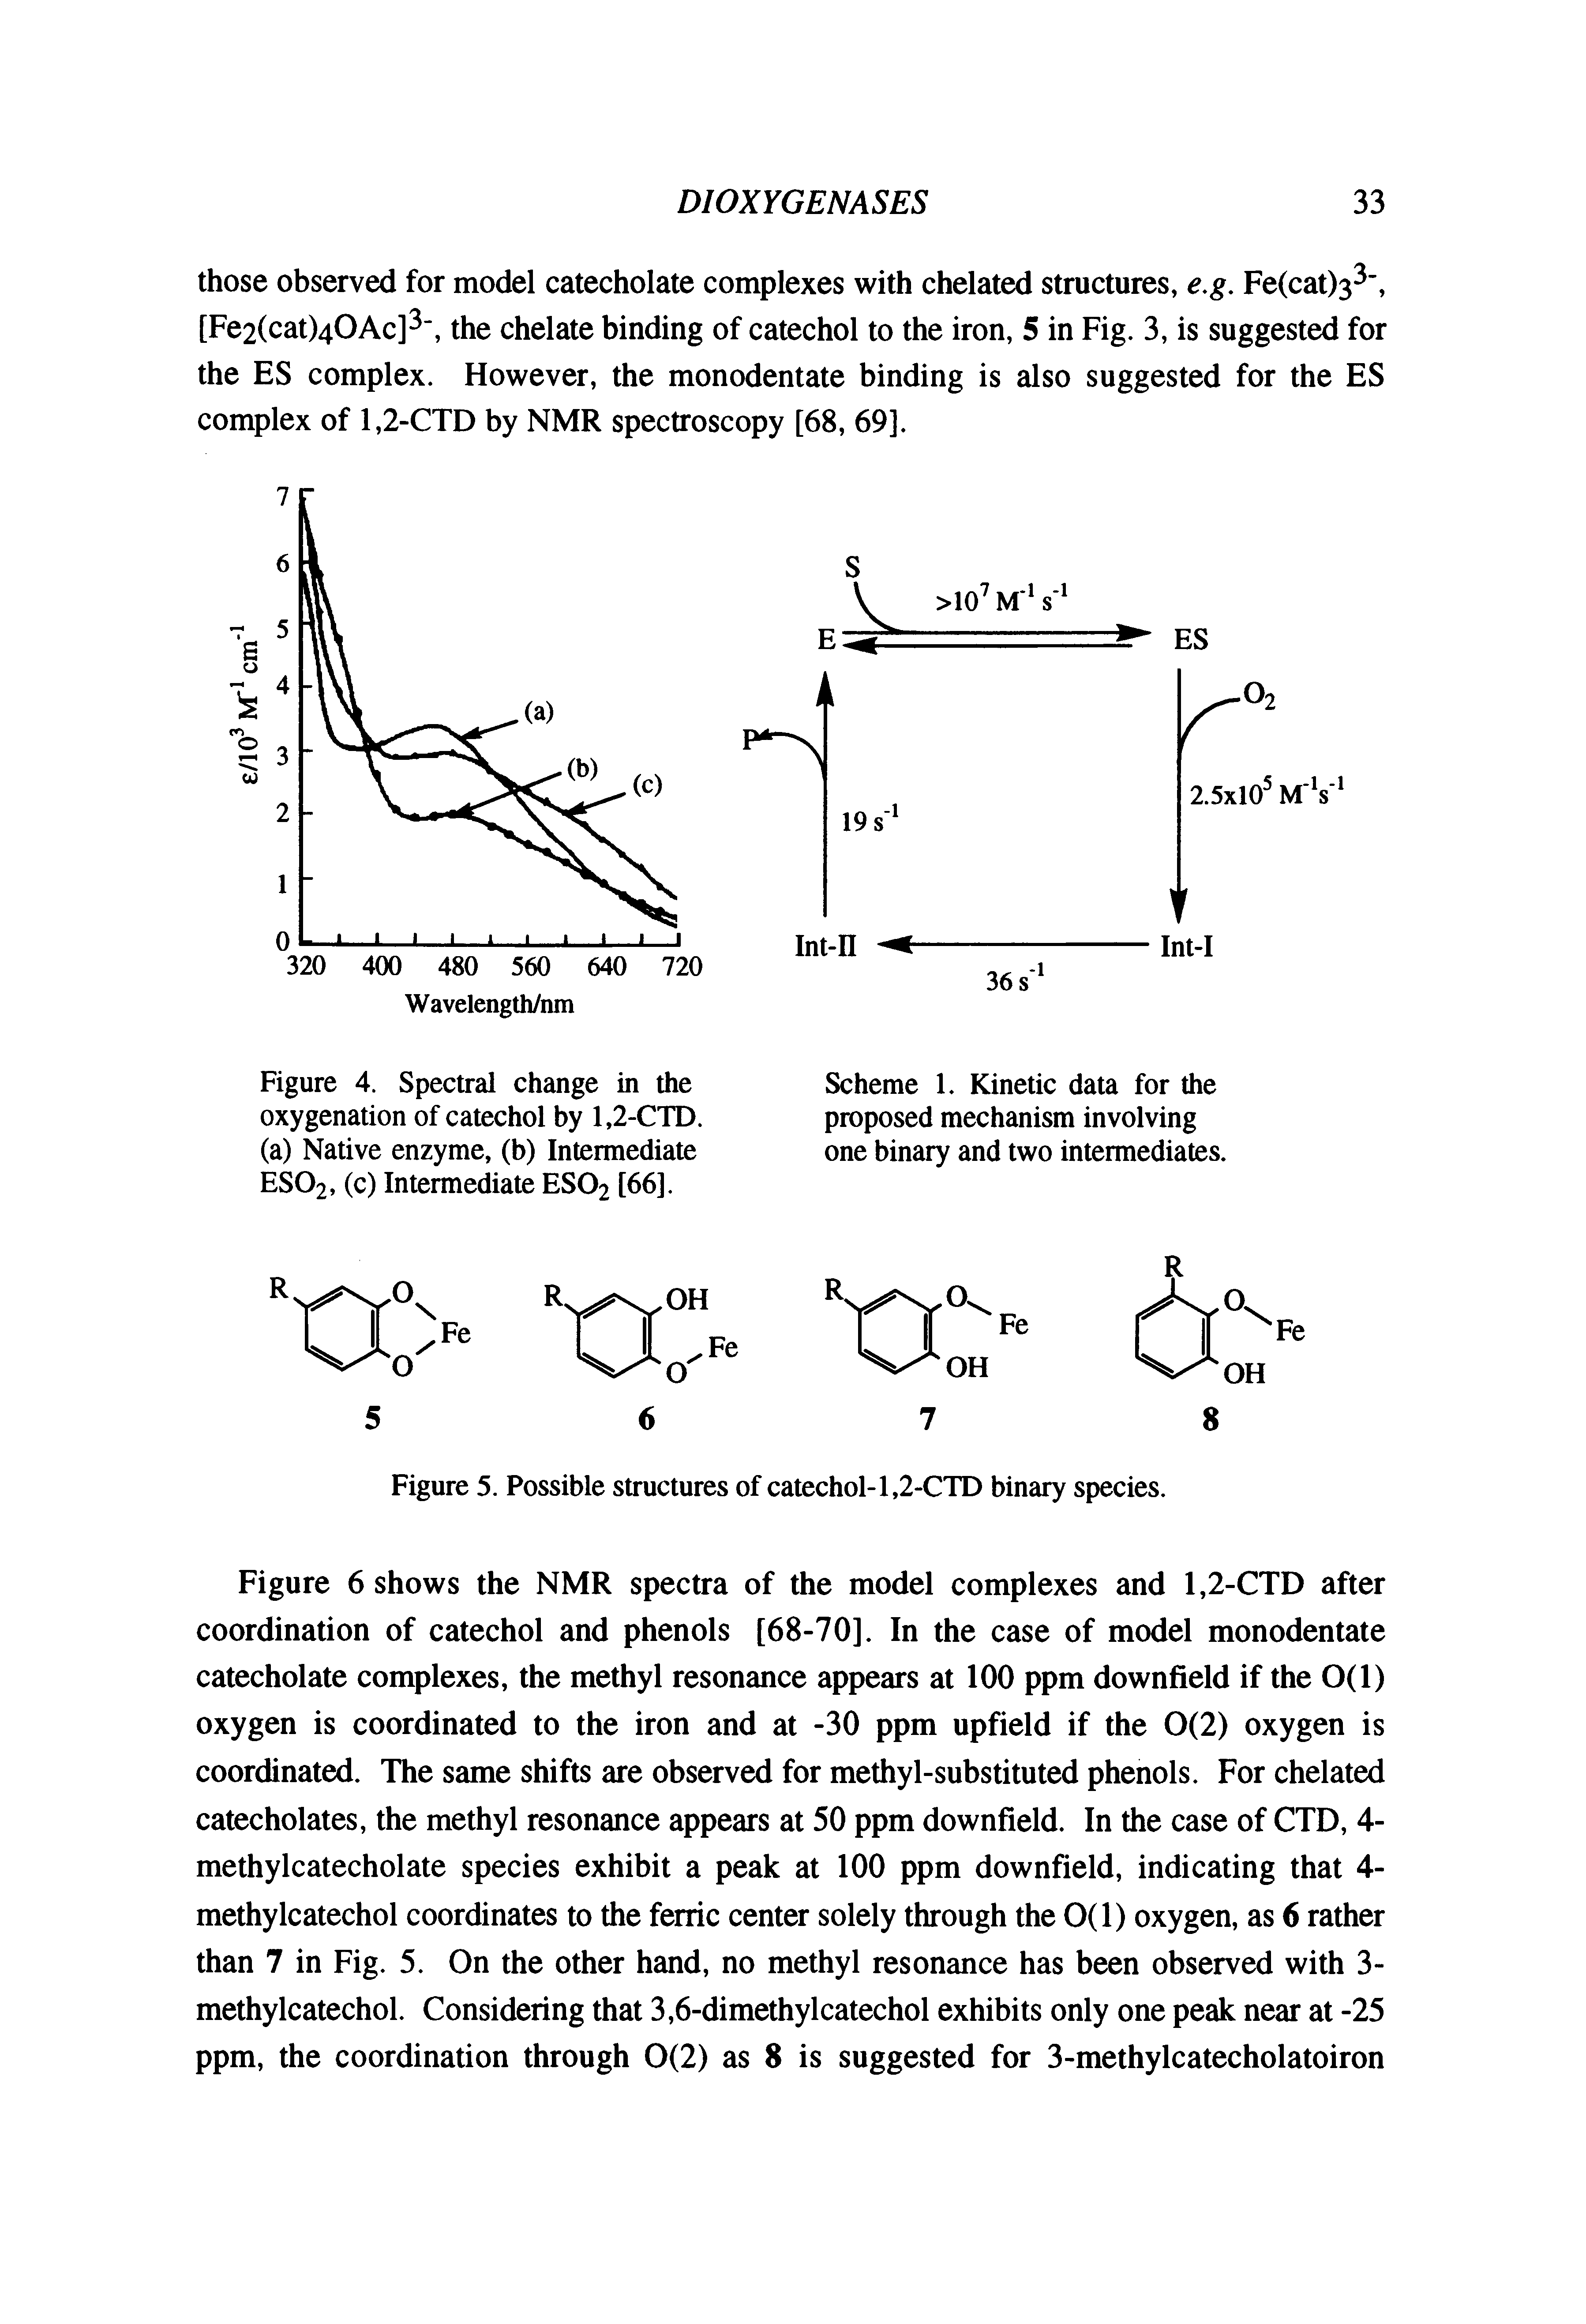 Figure 6 shows the NMR spectra of the model complexes and 1,2-CTD after coordination of catechol and phenols [68-70]. In the case of model monodentate catecholate complexes, the methyl resonance appears at 100 ppm downfield if the 0(1) oxygen is coordinated to the iron and at -30 ppm upfield if the 0(2) oxygen is coordinated. The same shifts are observed for methyl-substituted phenols. For chelated catecholates, the methyl resonance appears at 50 ppm downfield. In the case of CTD, 4-methylcatecholate species exhibit a peak at 100 ppm downfield, indicating that 4-methylcatechol coordinates to the ferric center solely through the 0(1) oxygen, as 6 rather than 7 in Fig. 5. On the other hand, no methyl resonance has been observed with 3-methylcatechol. Considering that 3,6-dimethylcatechol exhibits only one peak near at -25 ppm, the coordination through 0(2) as 8 is suggested for 3-methylcatecholatoiron...